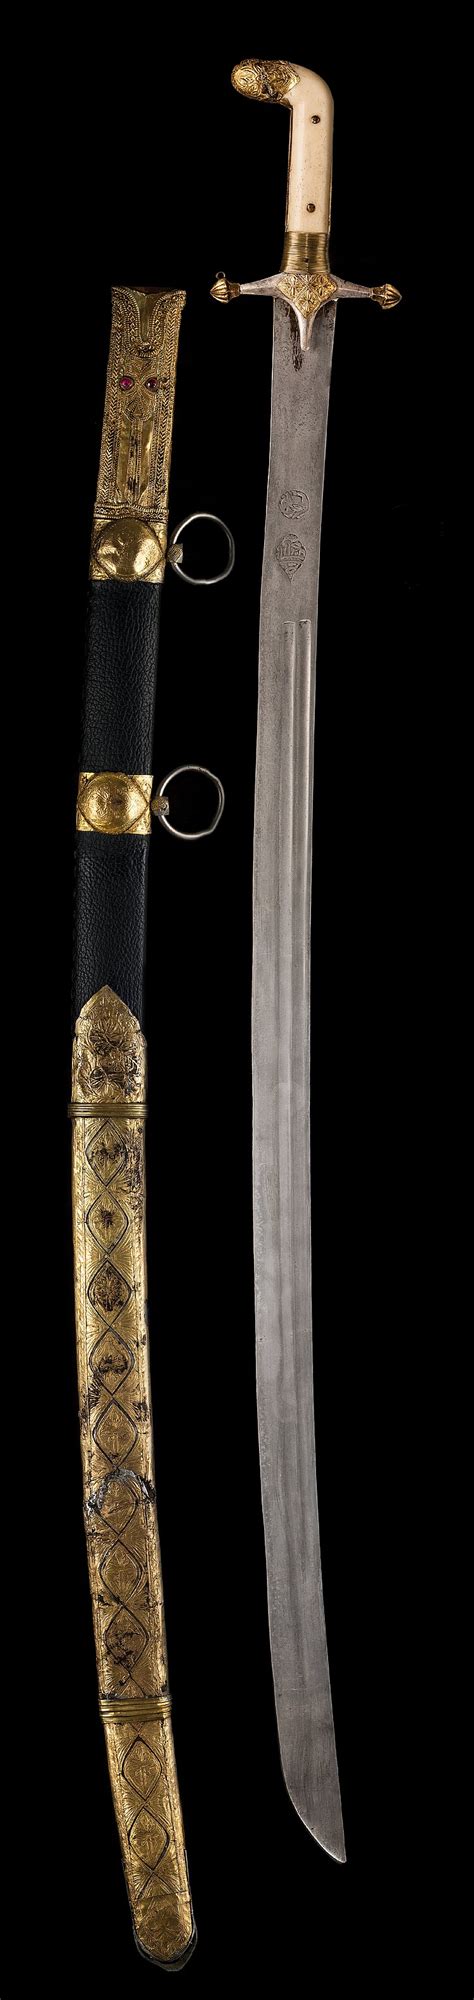 Sold Price Persian Sword Blade Persia 18th Century Hilt And